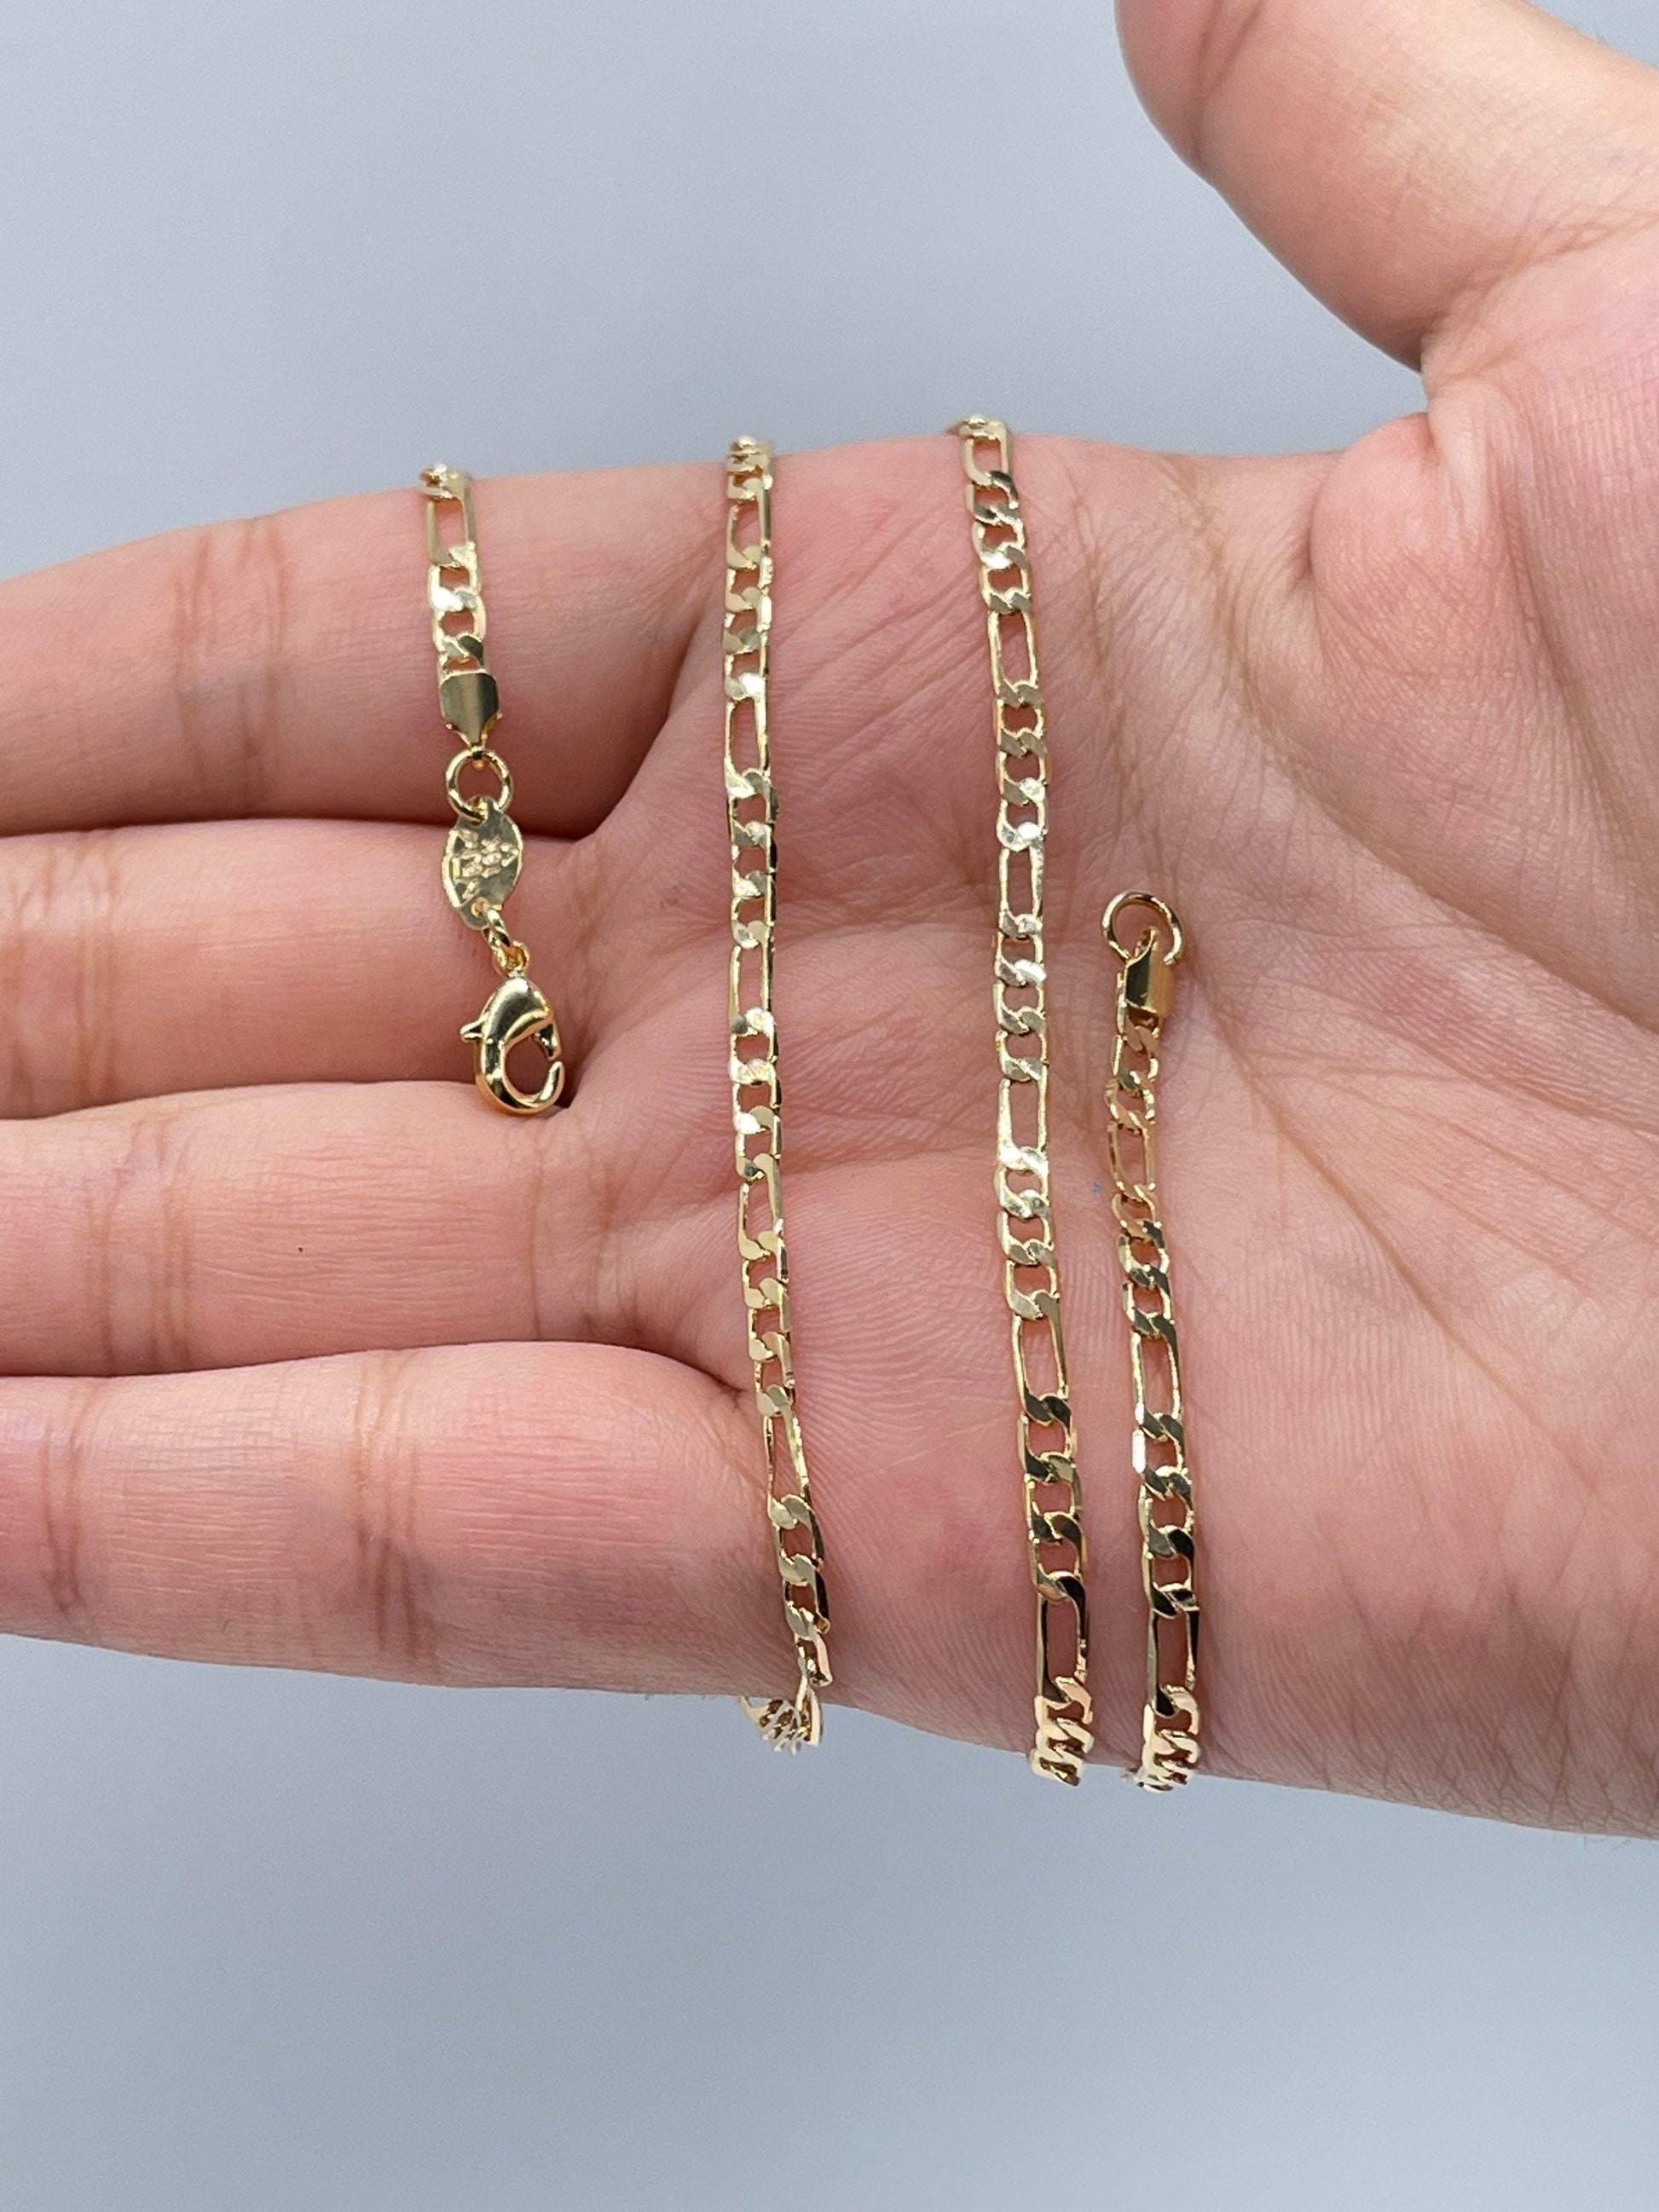 18 in 10 Karat Gold Chain (3 Small Links, 1 Large Link)